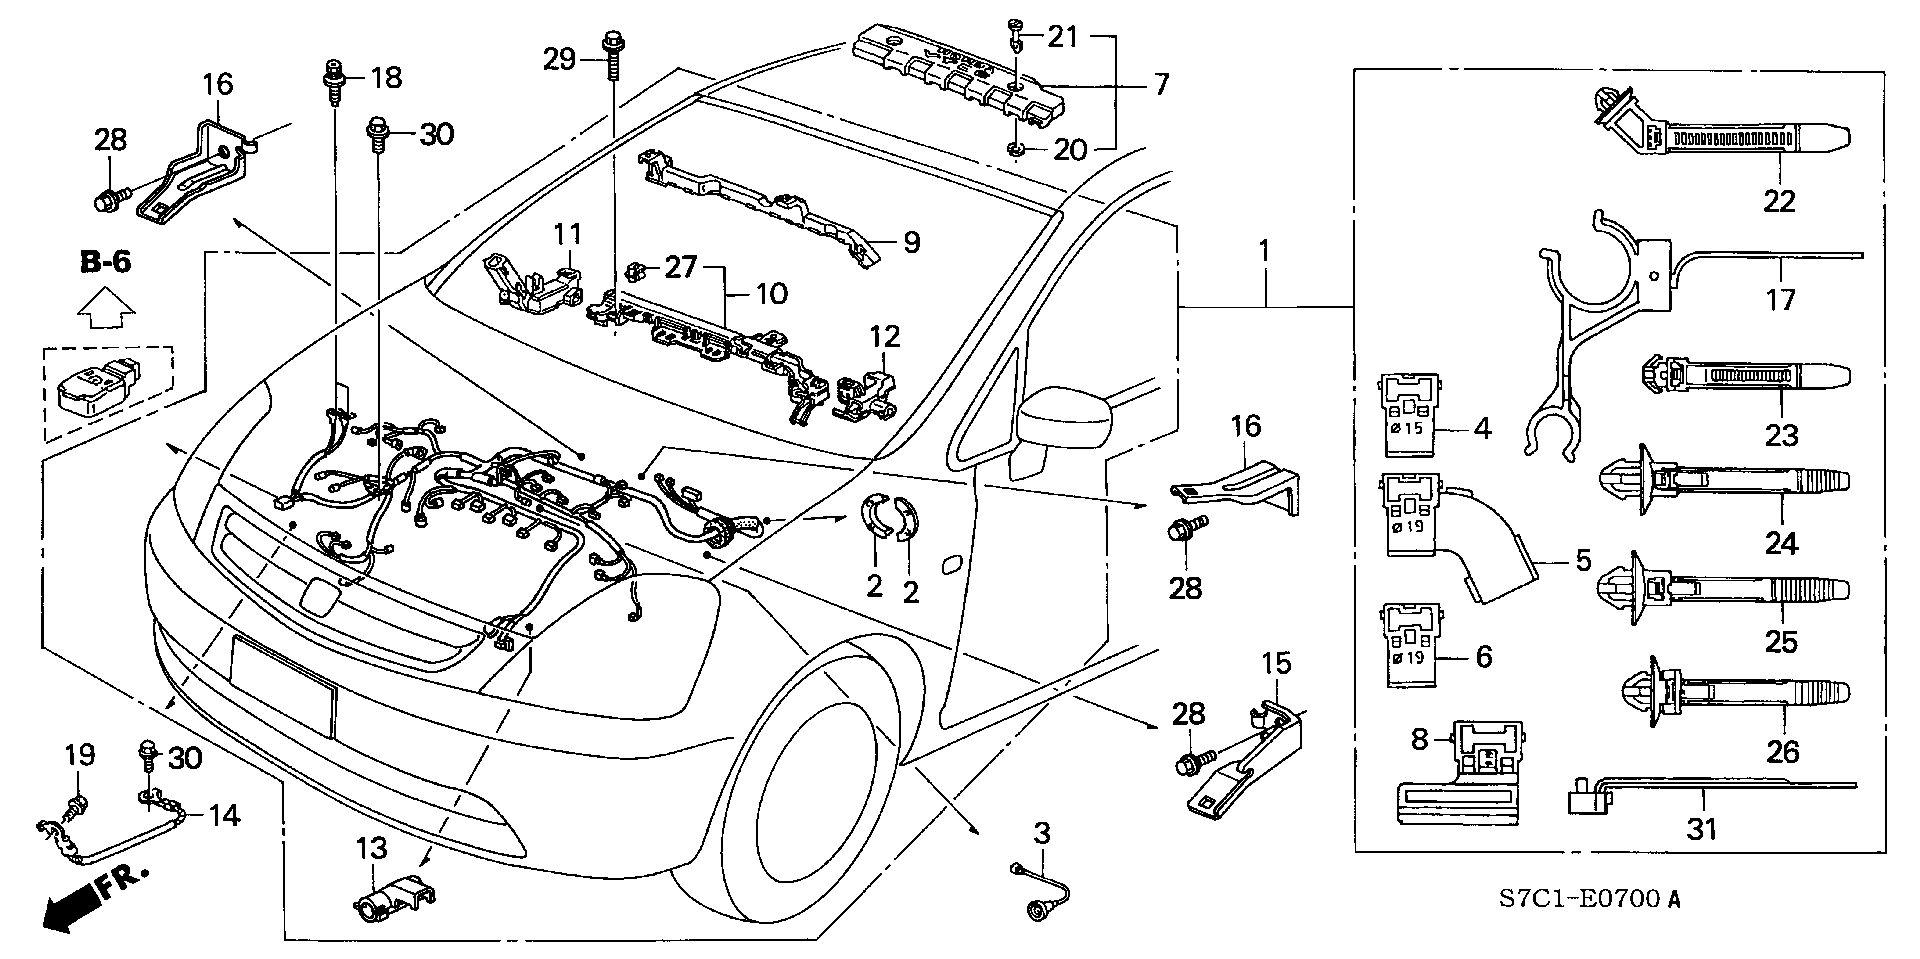 ENGINE WIRE HARNESS (1.7L)